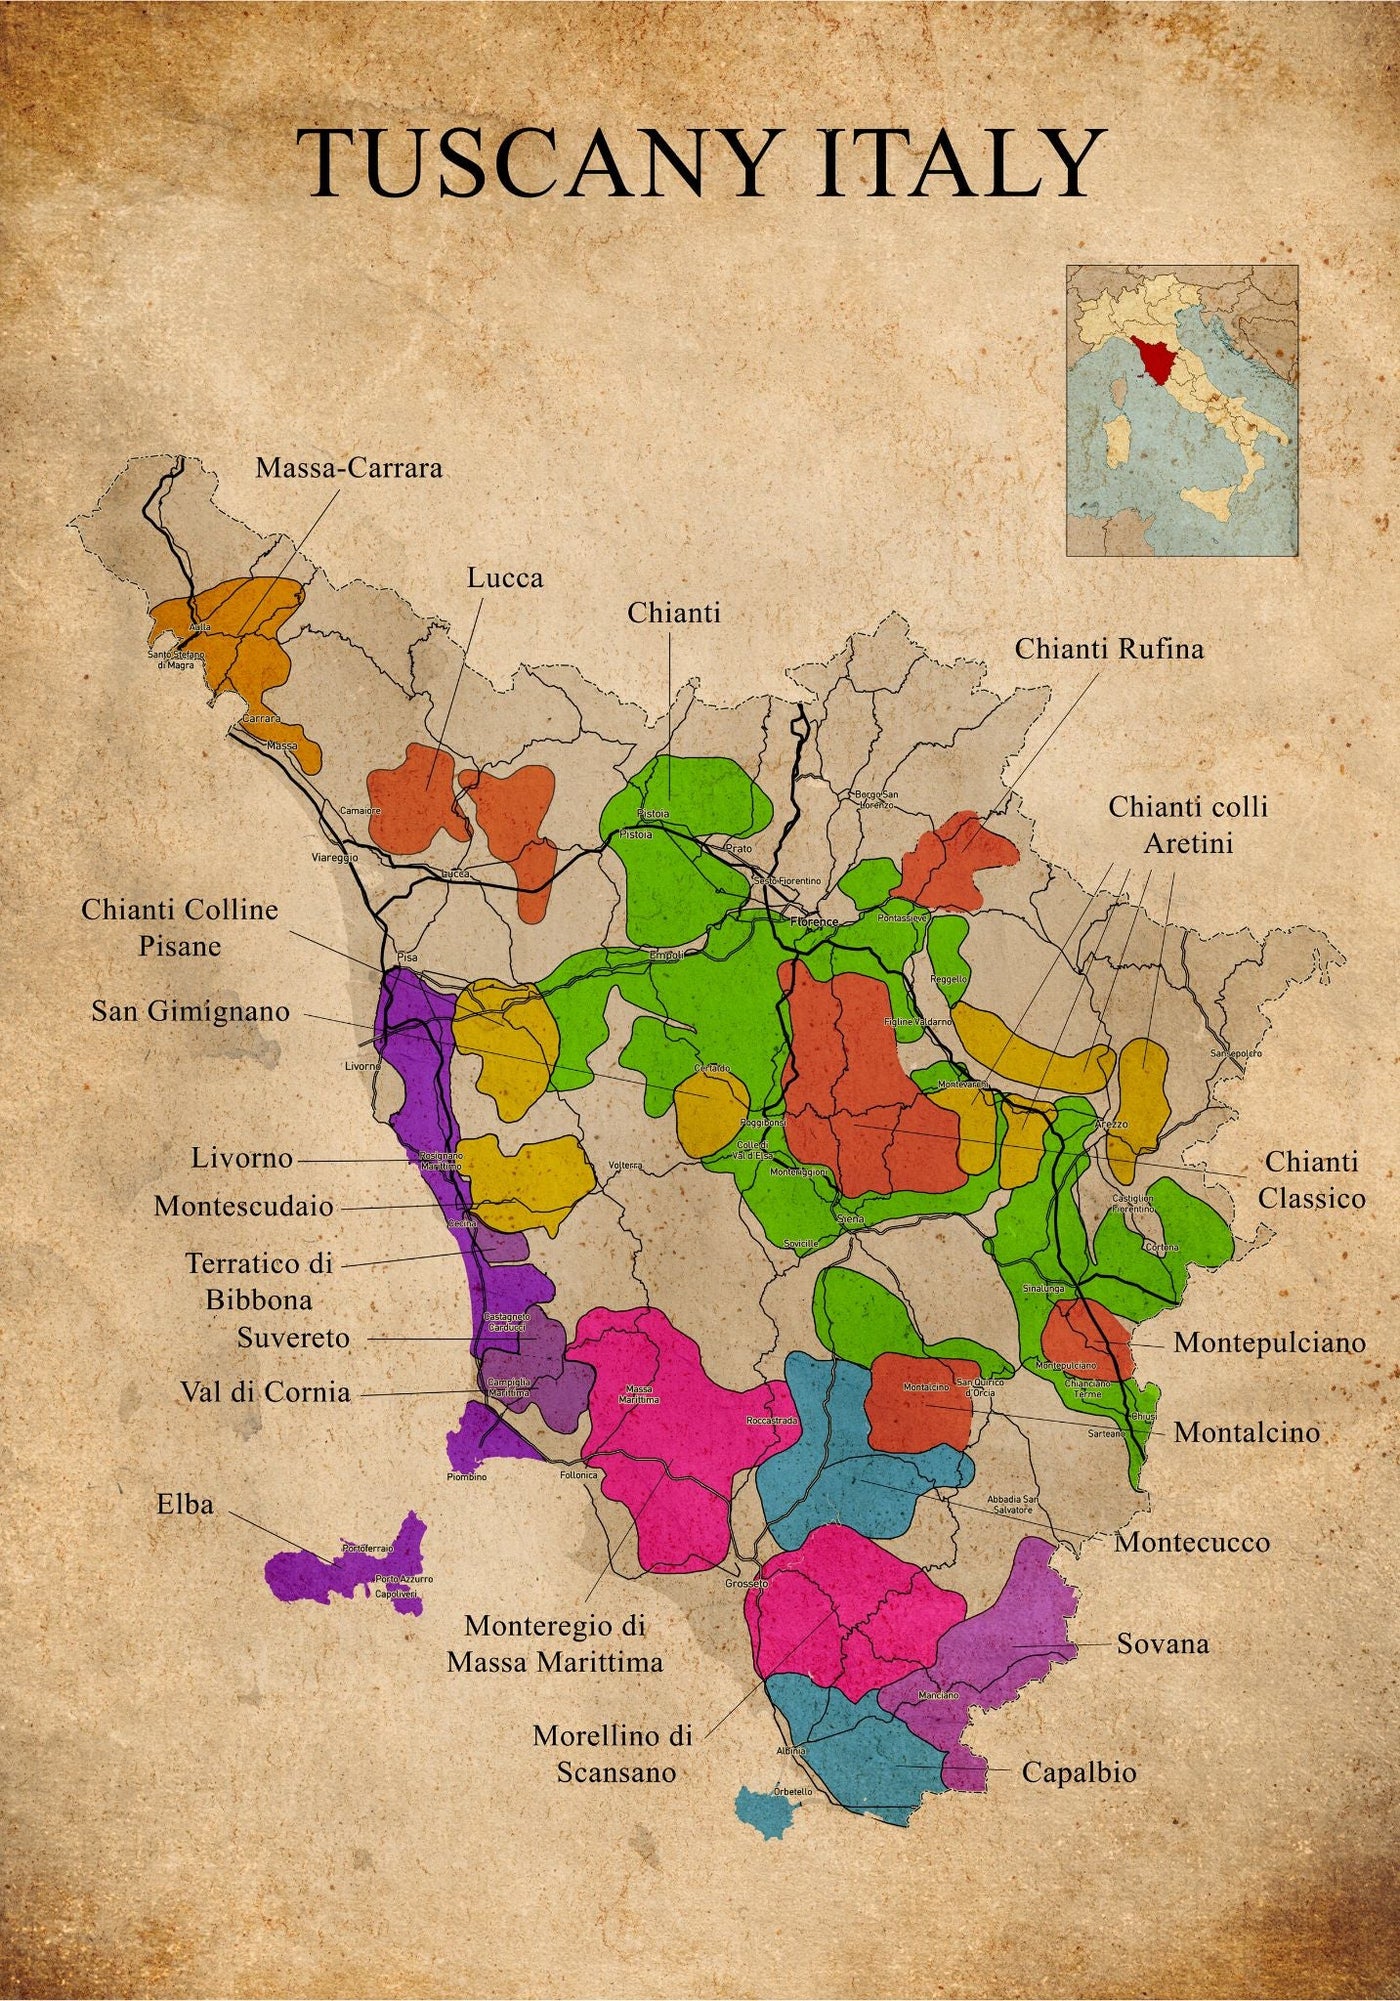 Tuscany Wine Region: A Deep Dive into Its History, Grapes, and Wines - Cocktailored